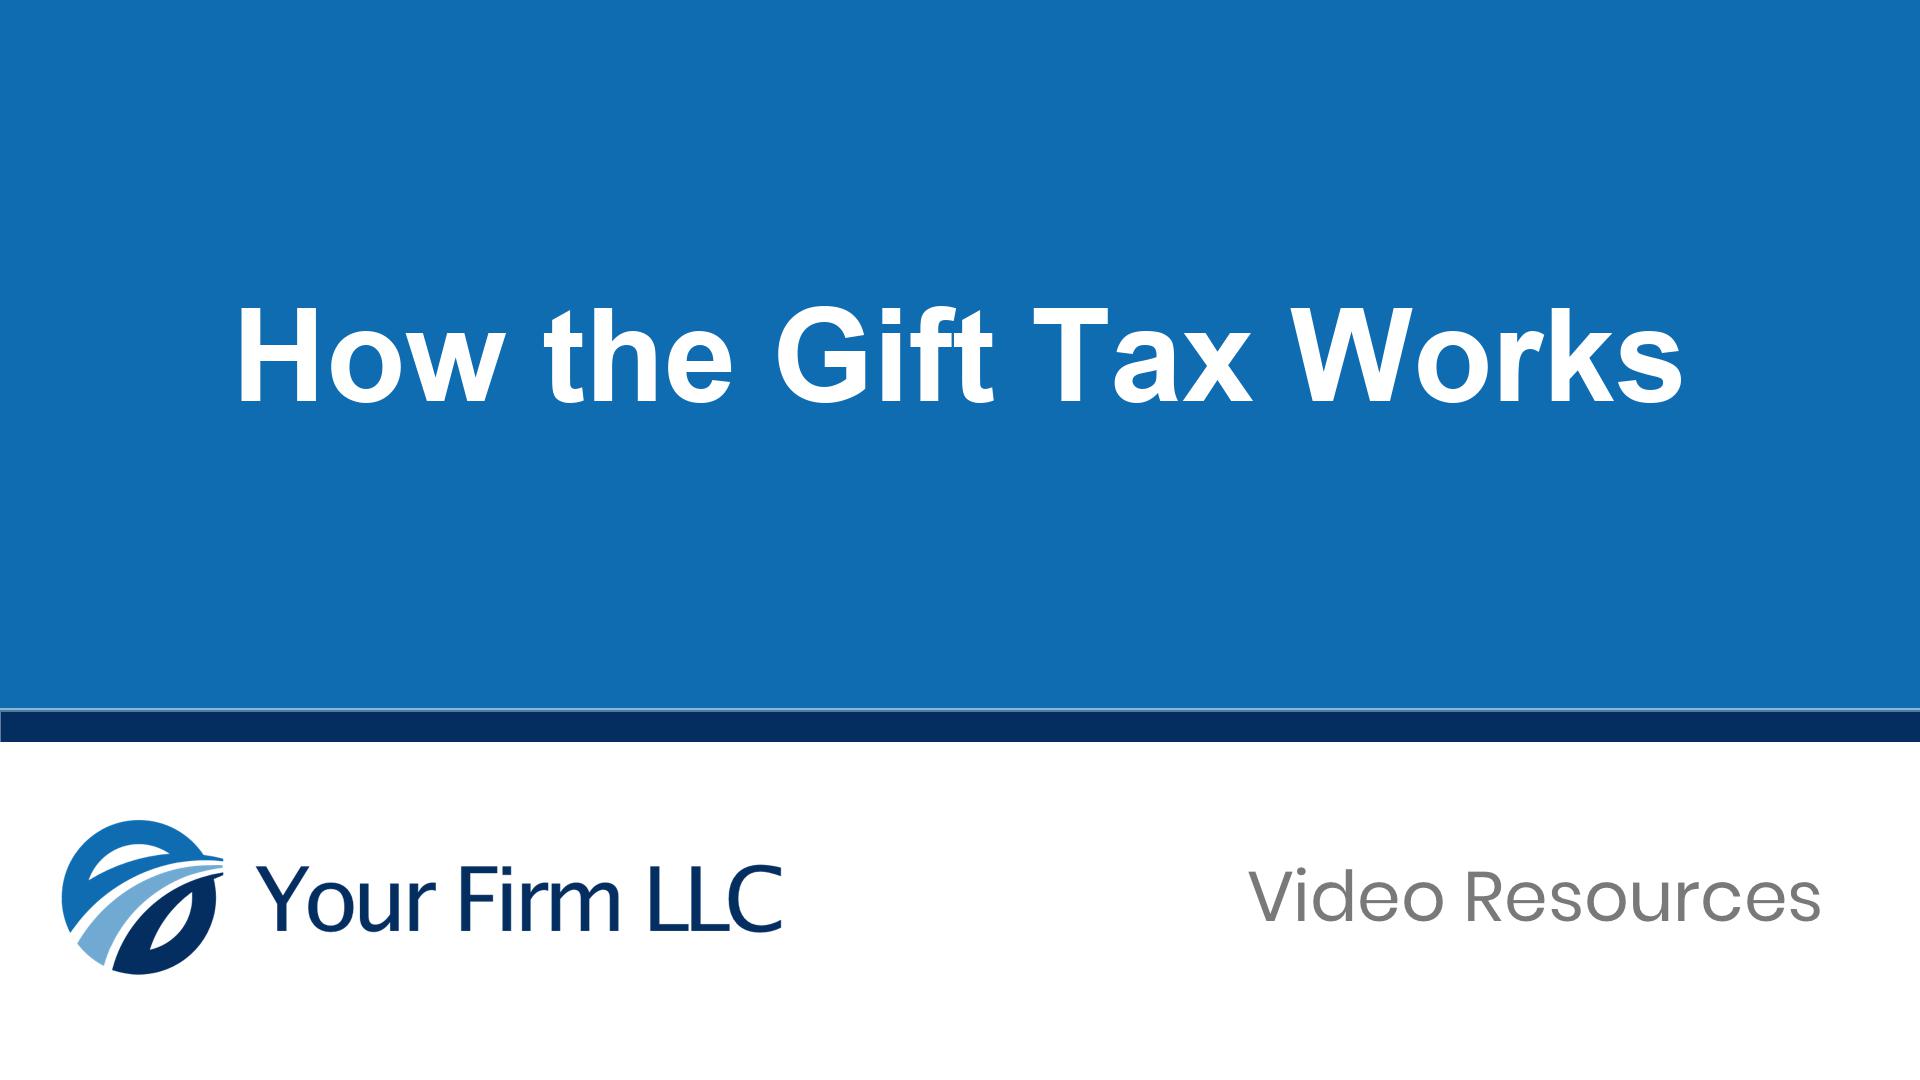 How the Gift Tax Works